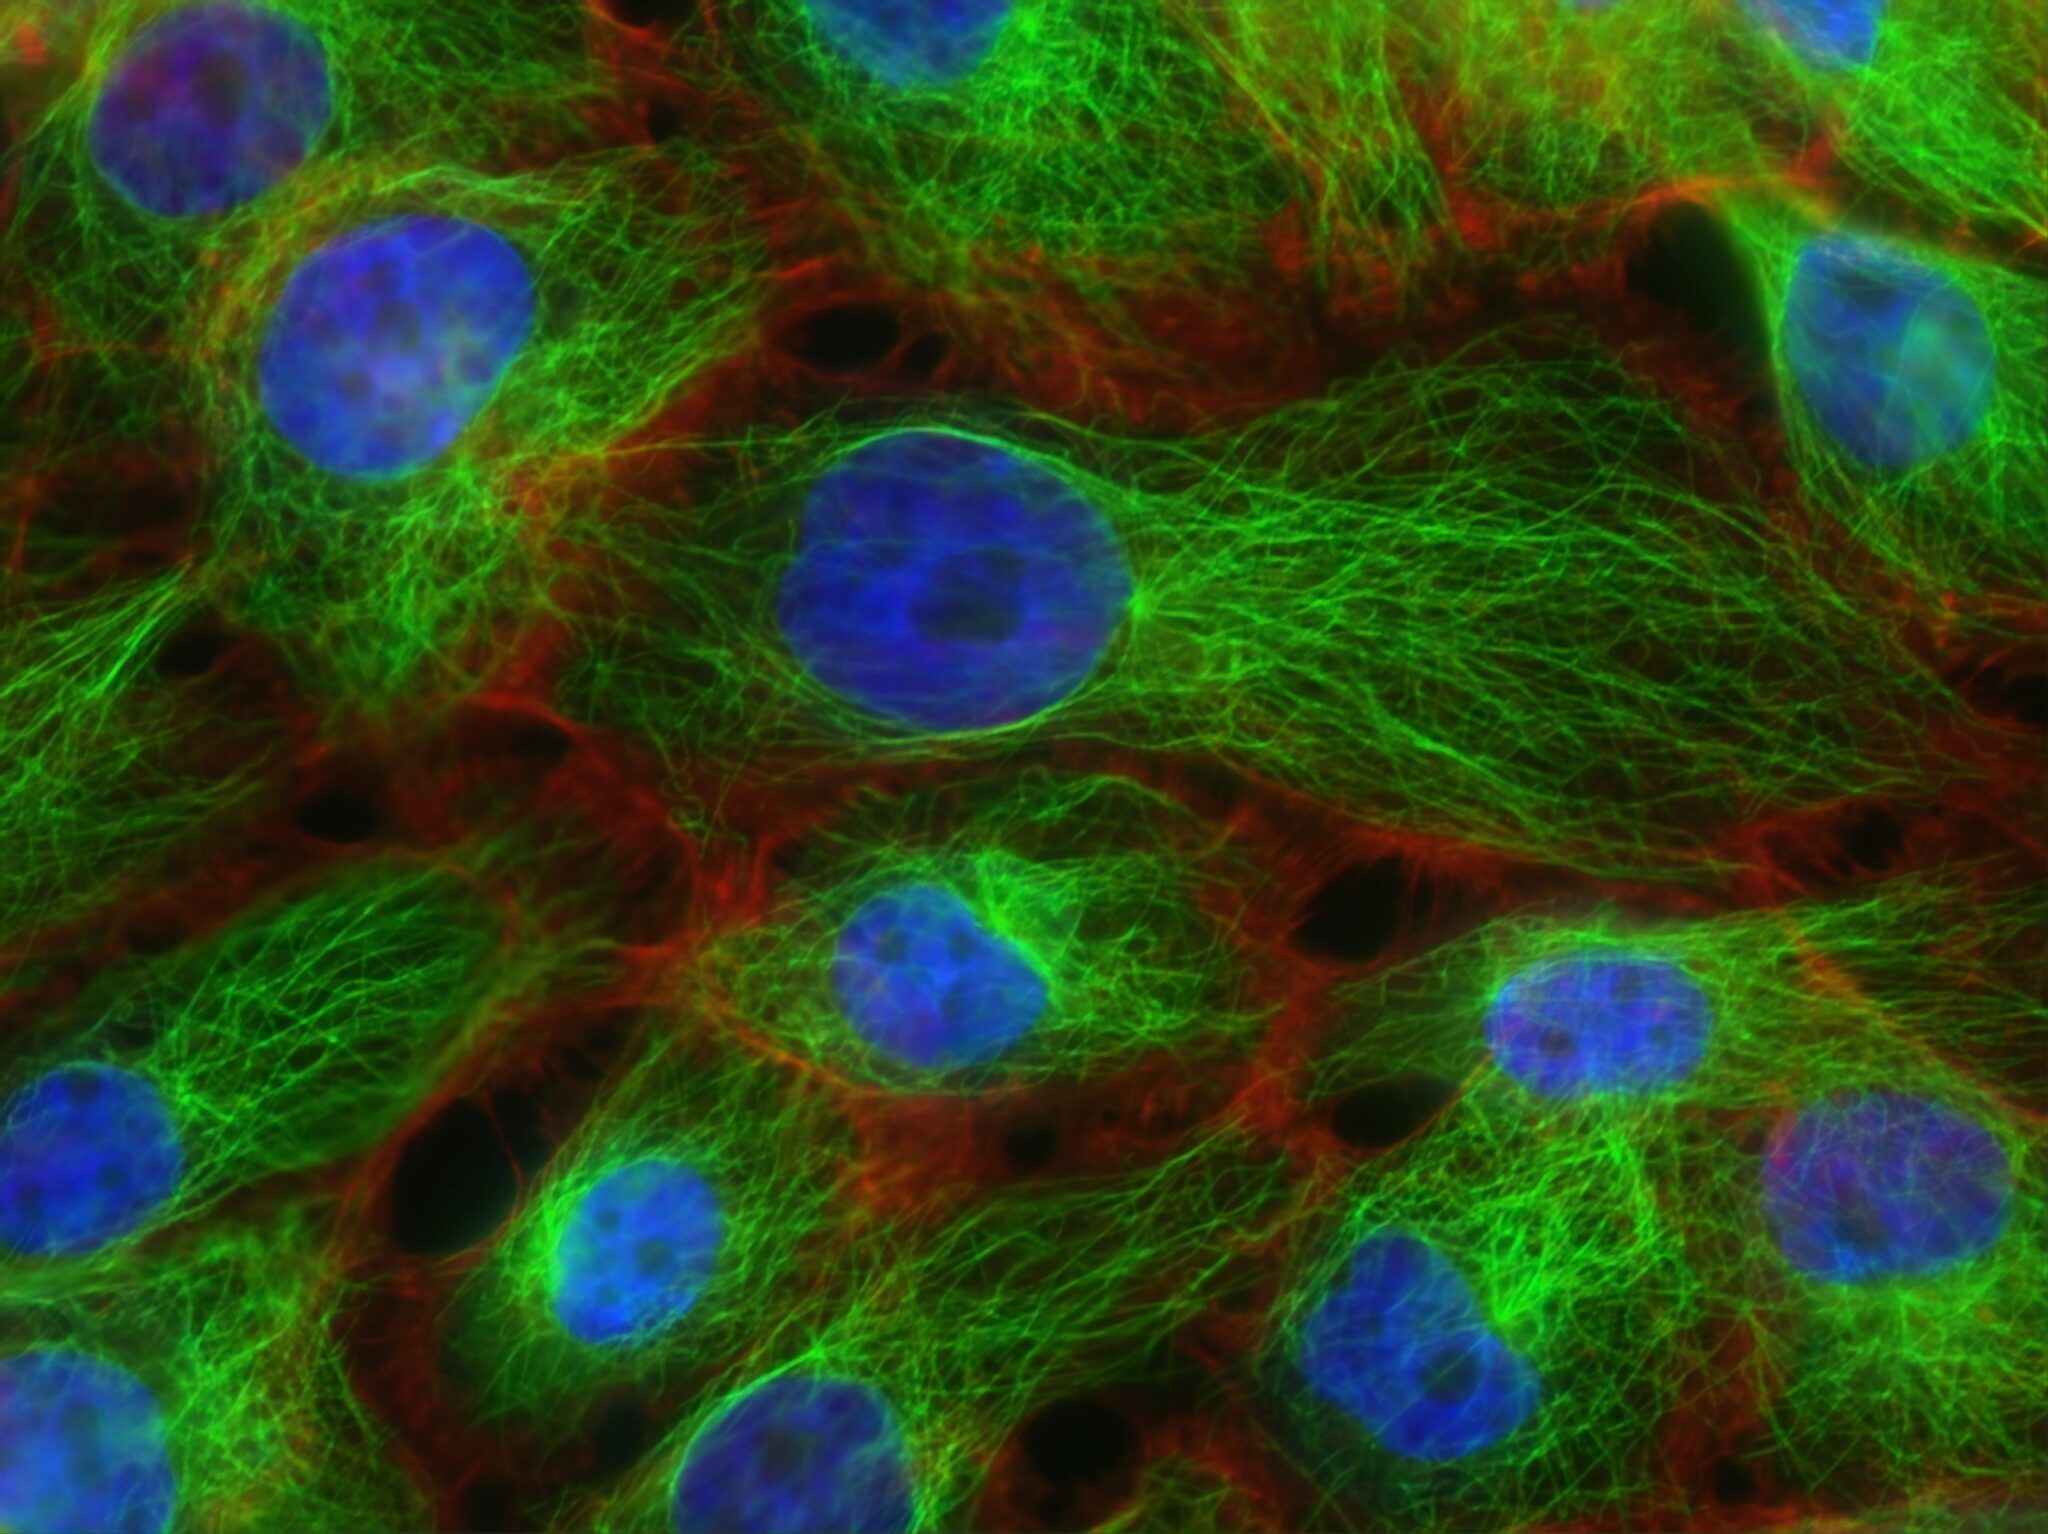 The image shows stress fibres and microtubules in human breast cancer. Image by: Christina Stuelten, Carole Parent, 2011